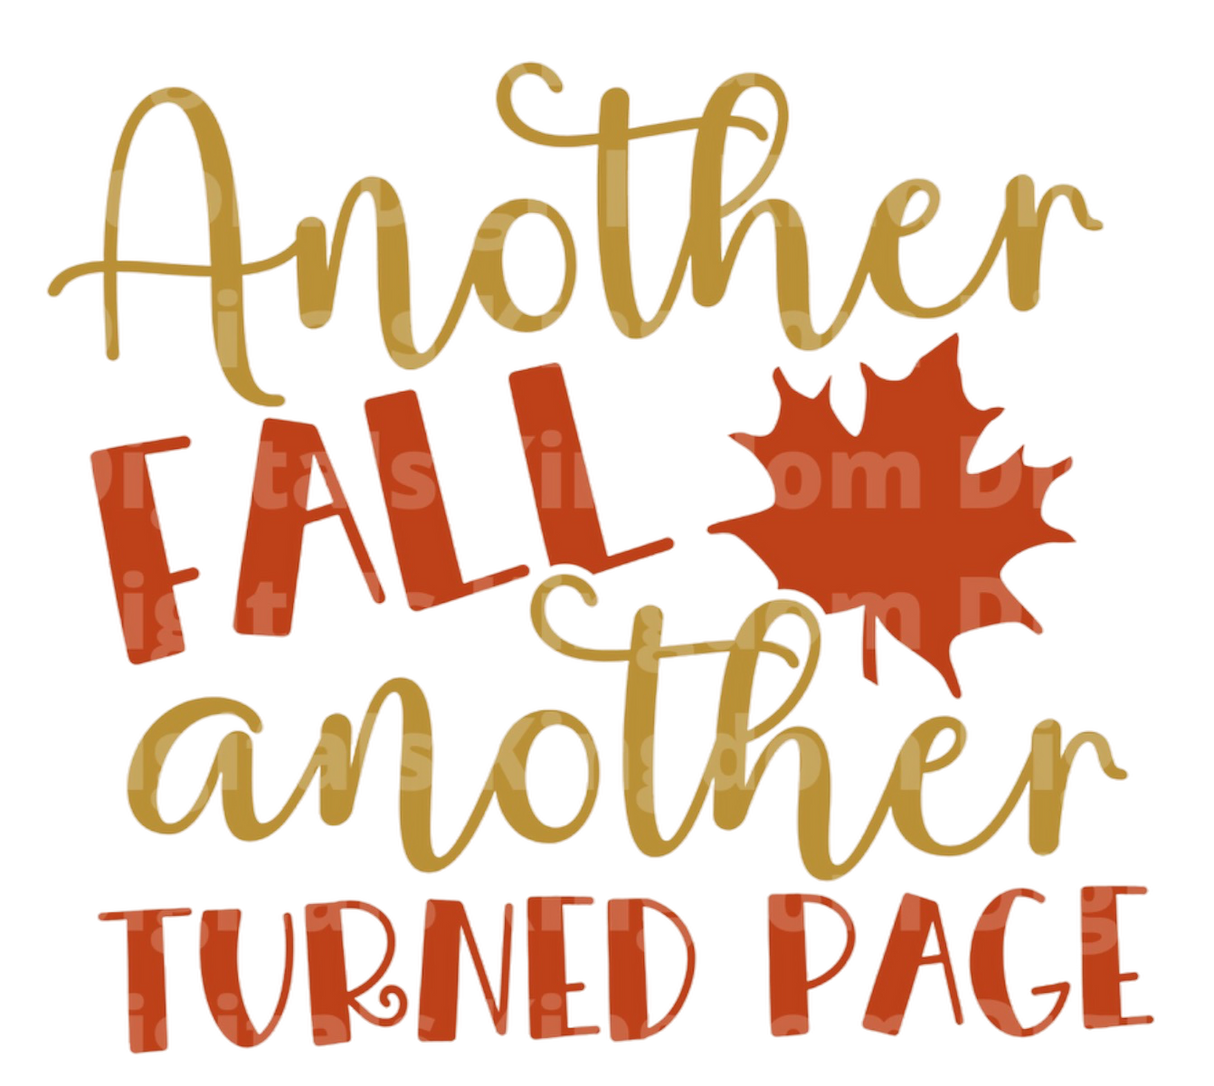 Another fall, another turned page SVG Cut File